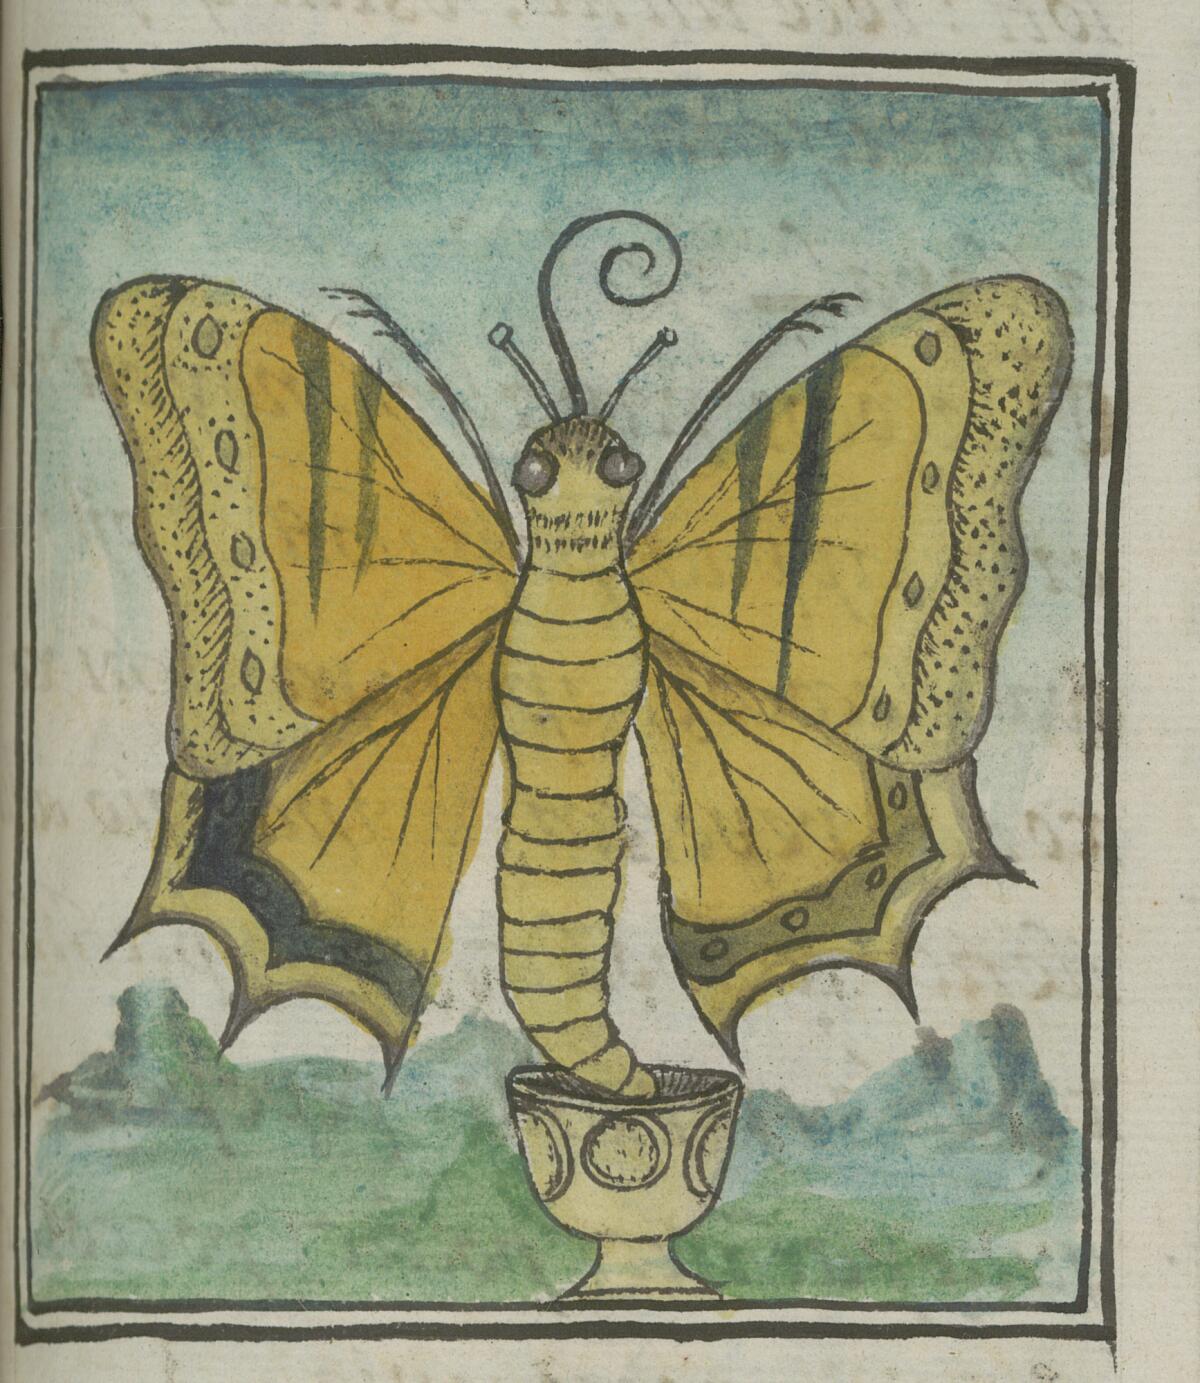 A colonial-era illustration with gentle washes of blue and yellow shows a large butterfly emerging from its chrysalis.